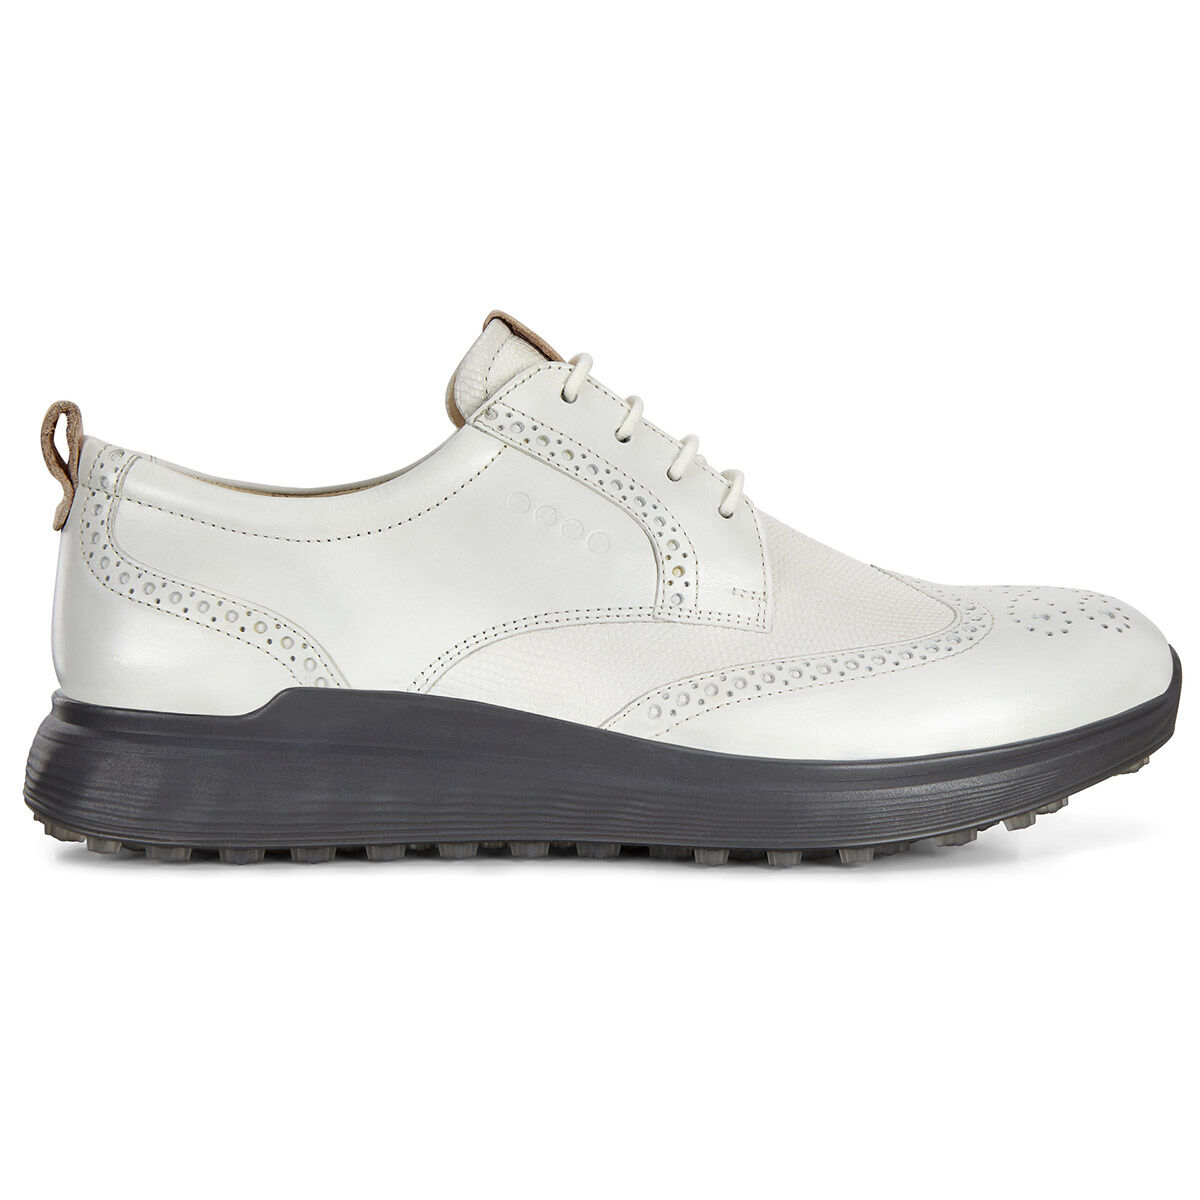 ECCO Golf S-Classic Shoes from american 